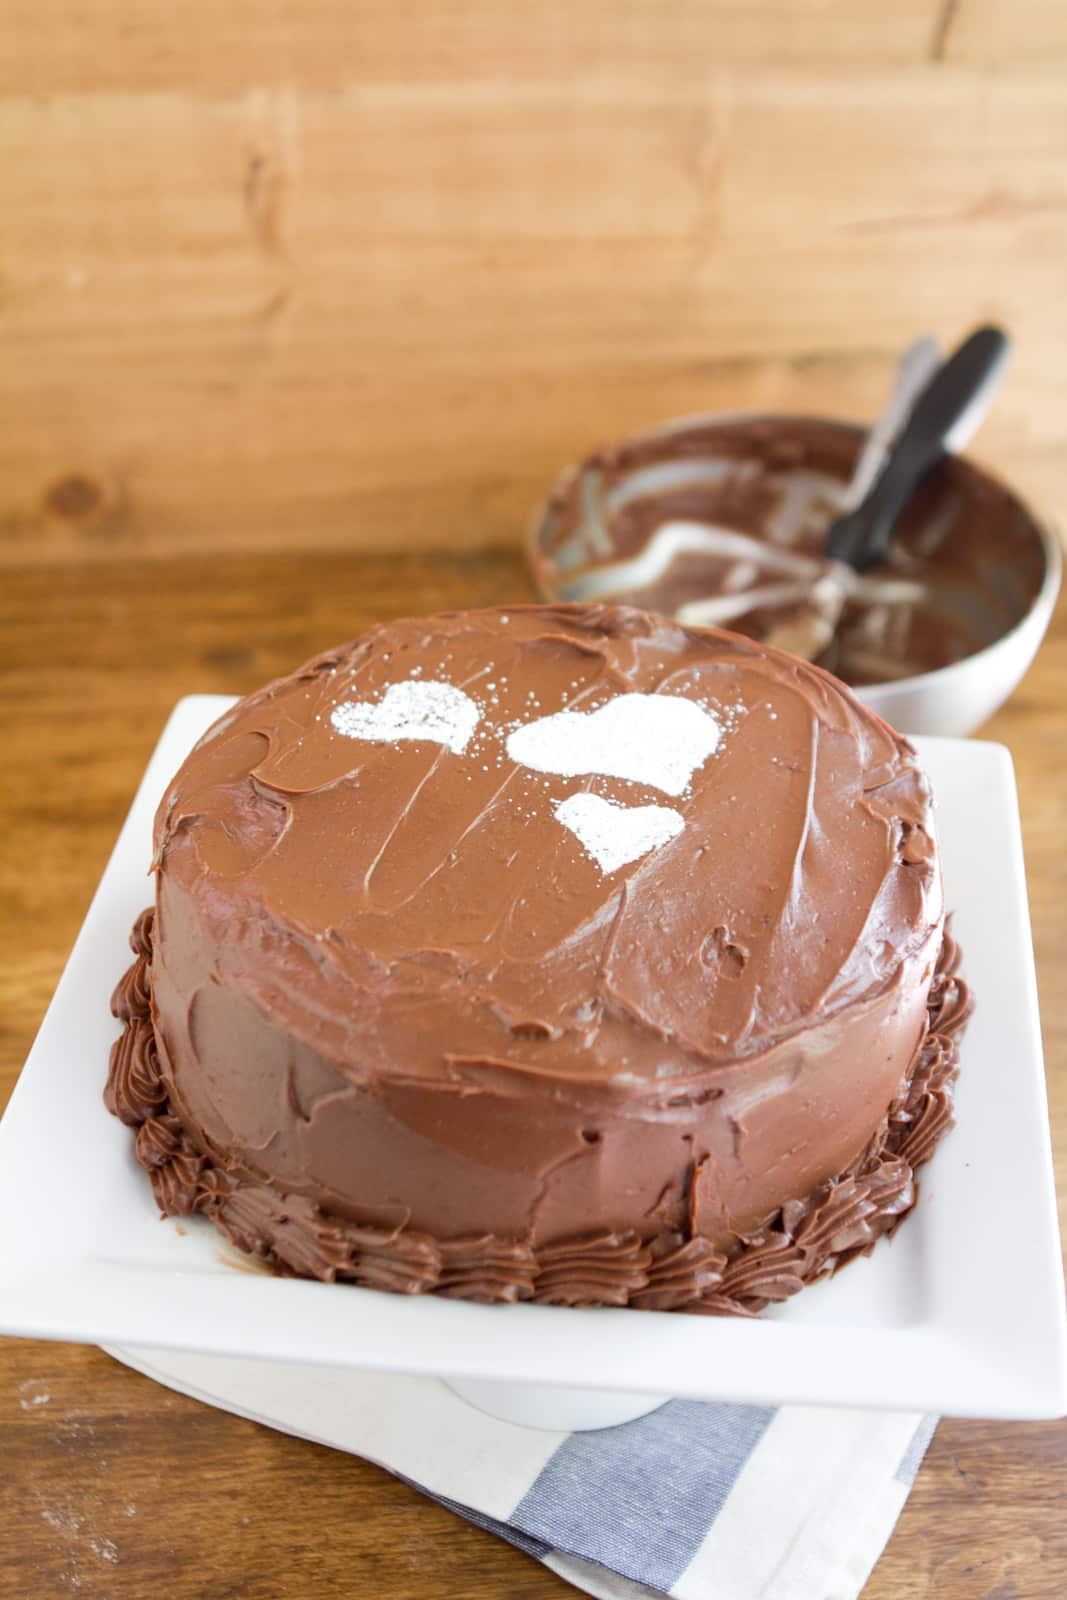 Chocolate Beet Cake with Ganache Frosting